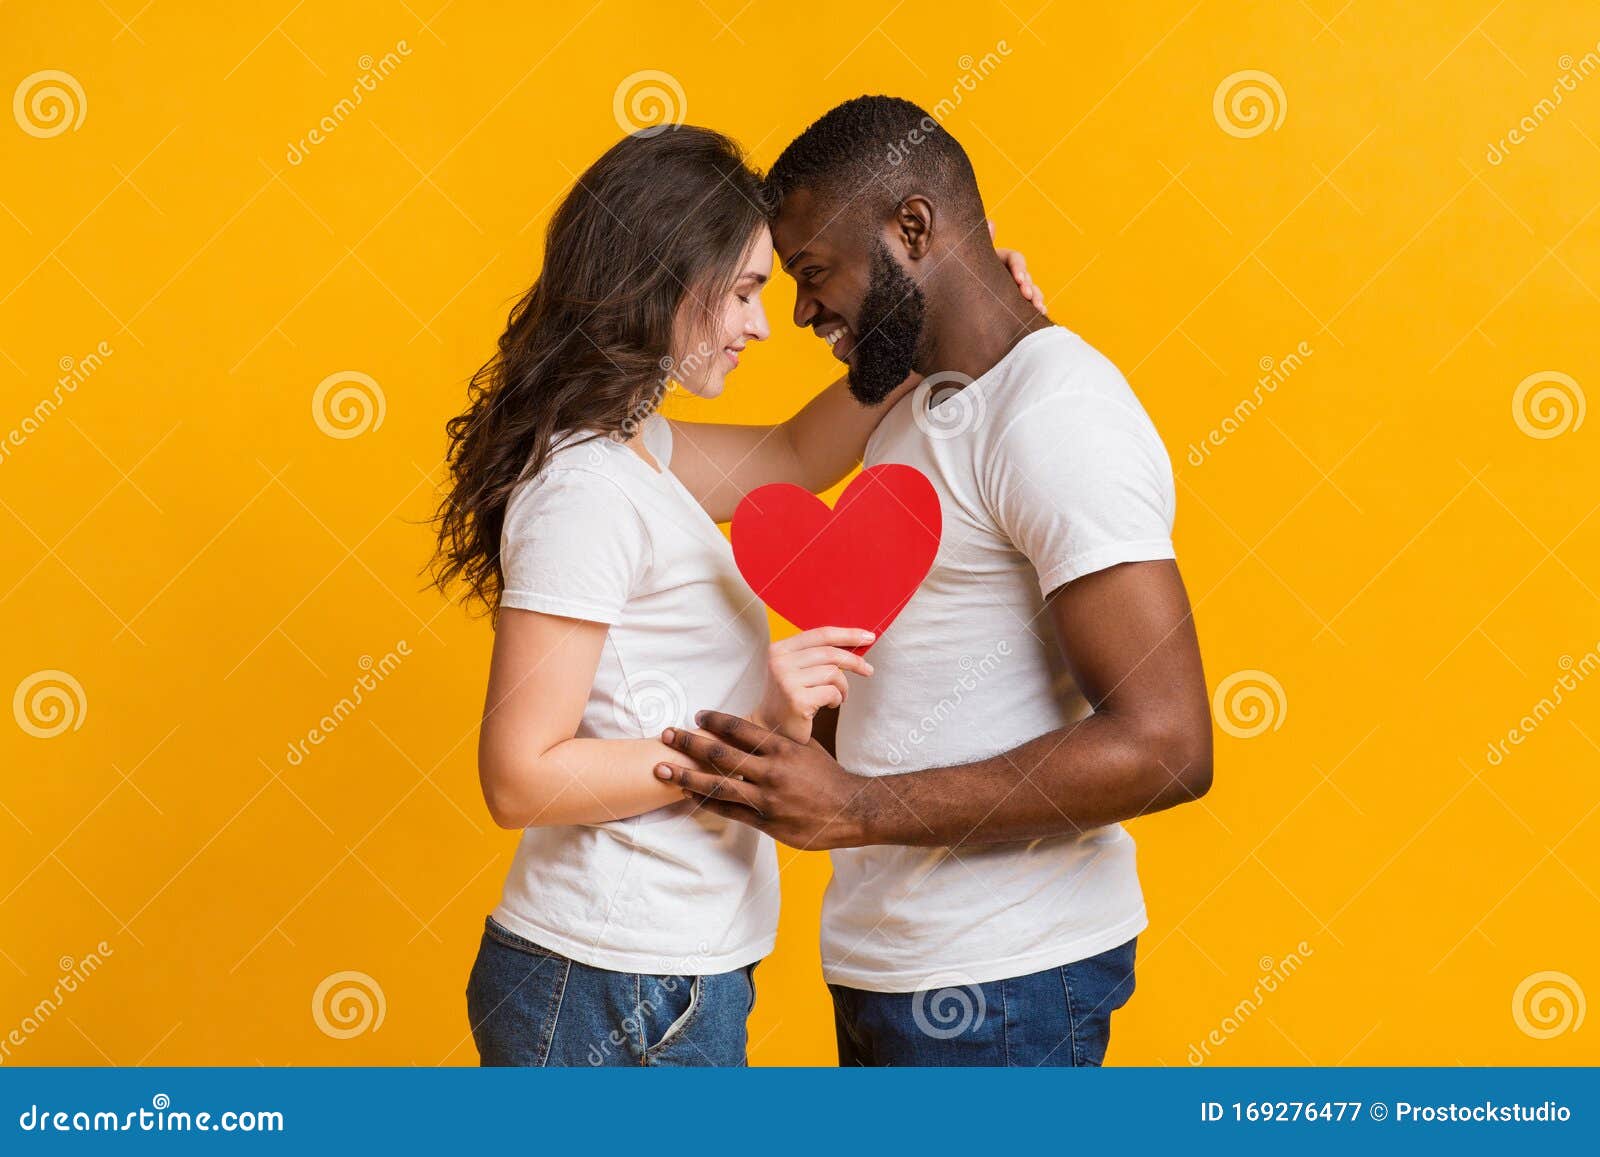 Romantic Interracial Couple Holding Red Paper Heart and Touching Foreheads  Stock Image - Image of interracial, lover: 169276477